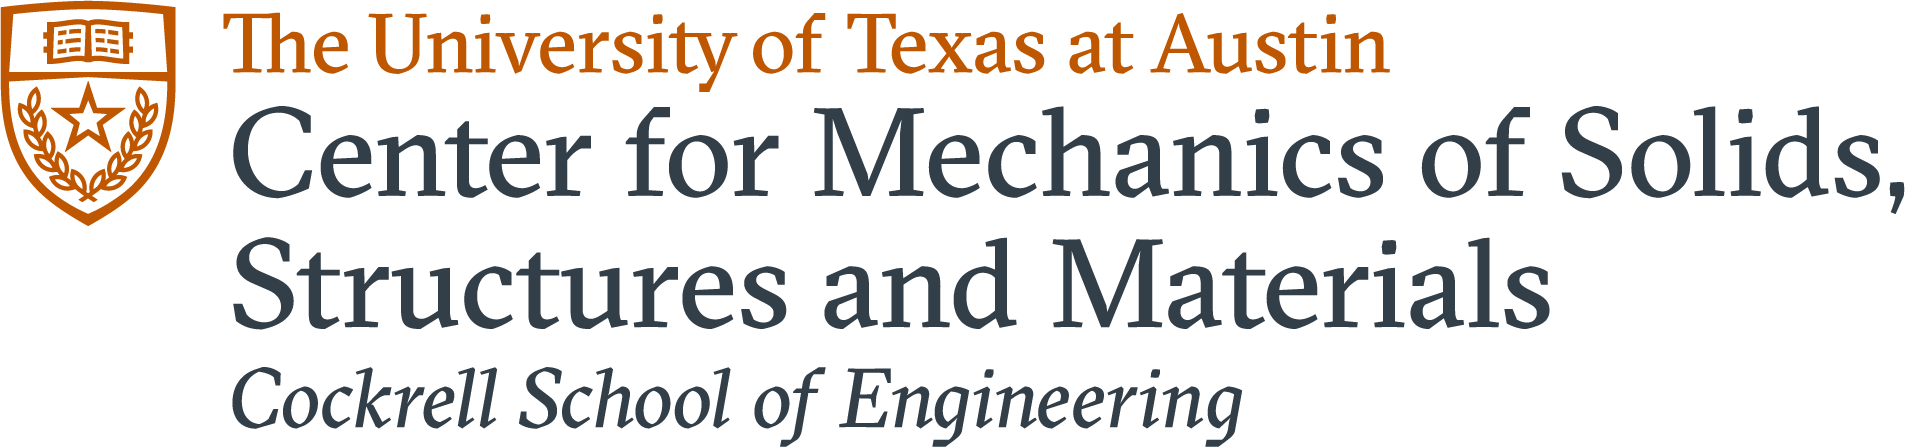 Center for Mechanics of Solids, Structures and Materials